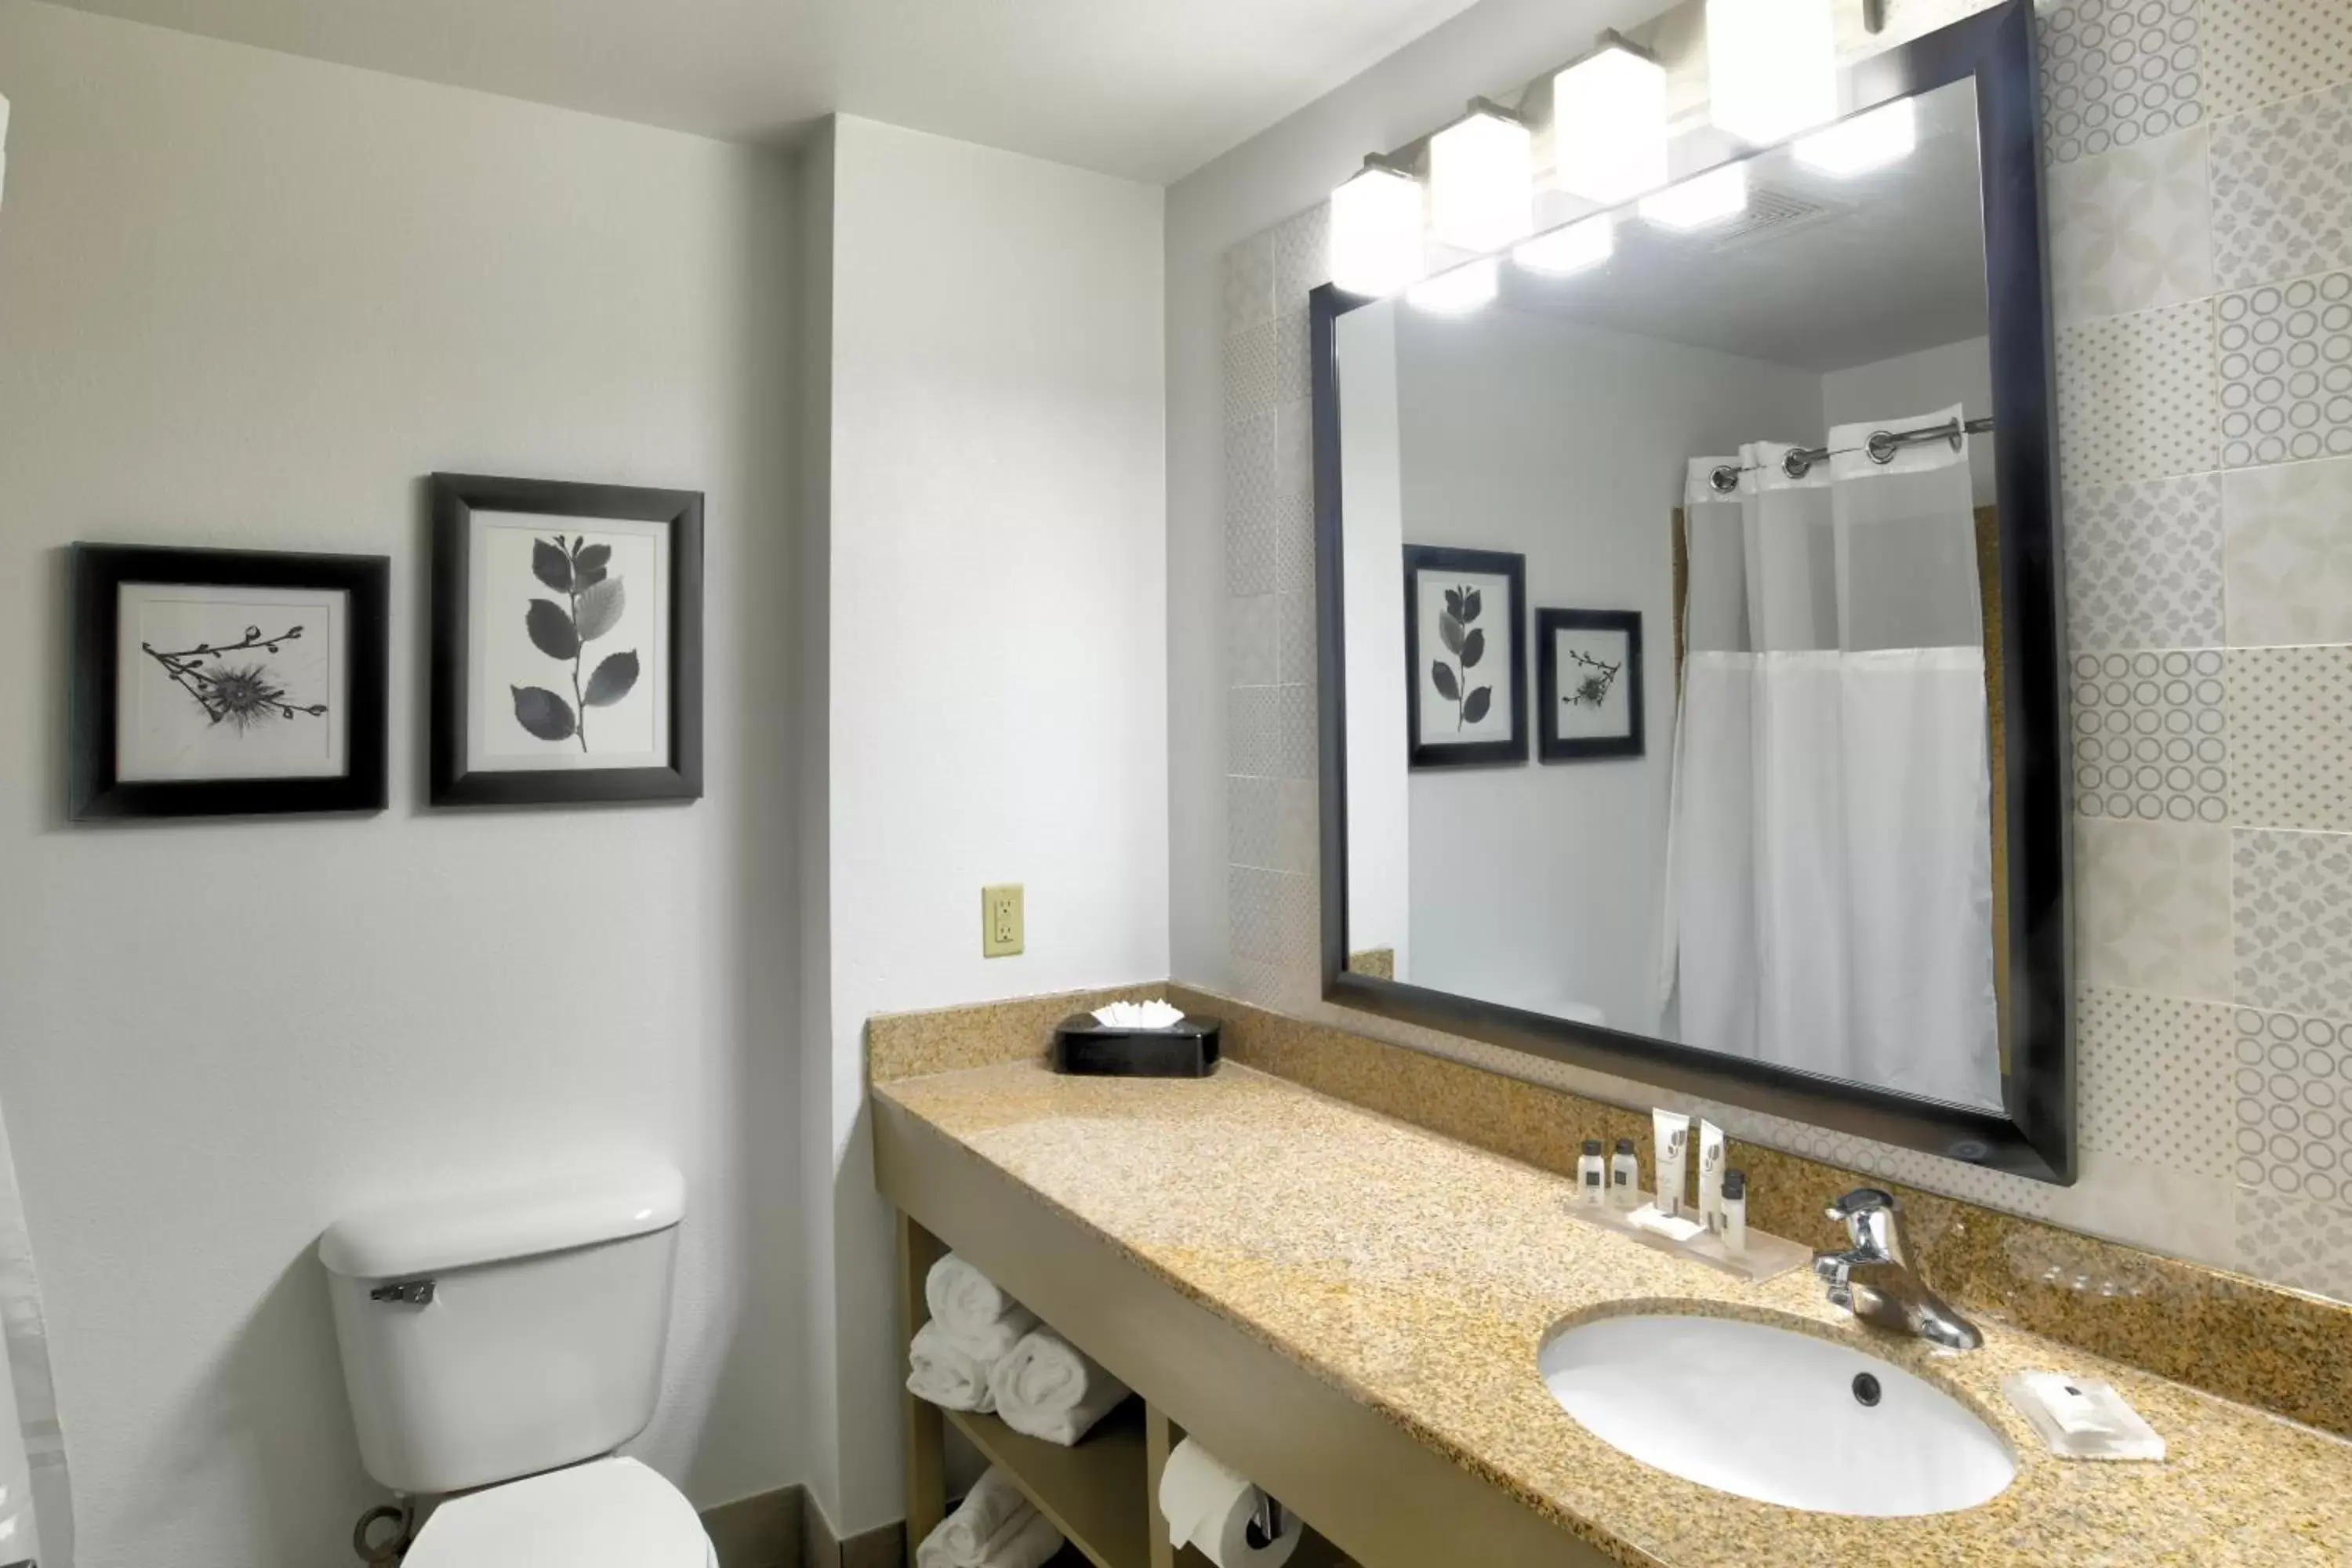 Bathroom in Country Inn & Suites by Radisson, Oklahoma City Airport, OK